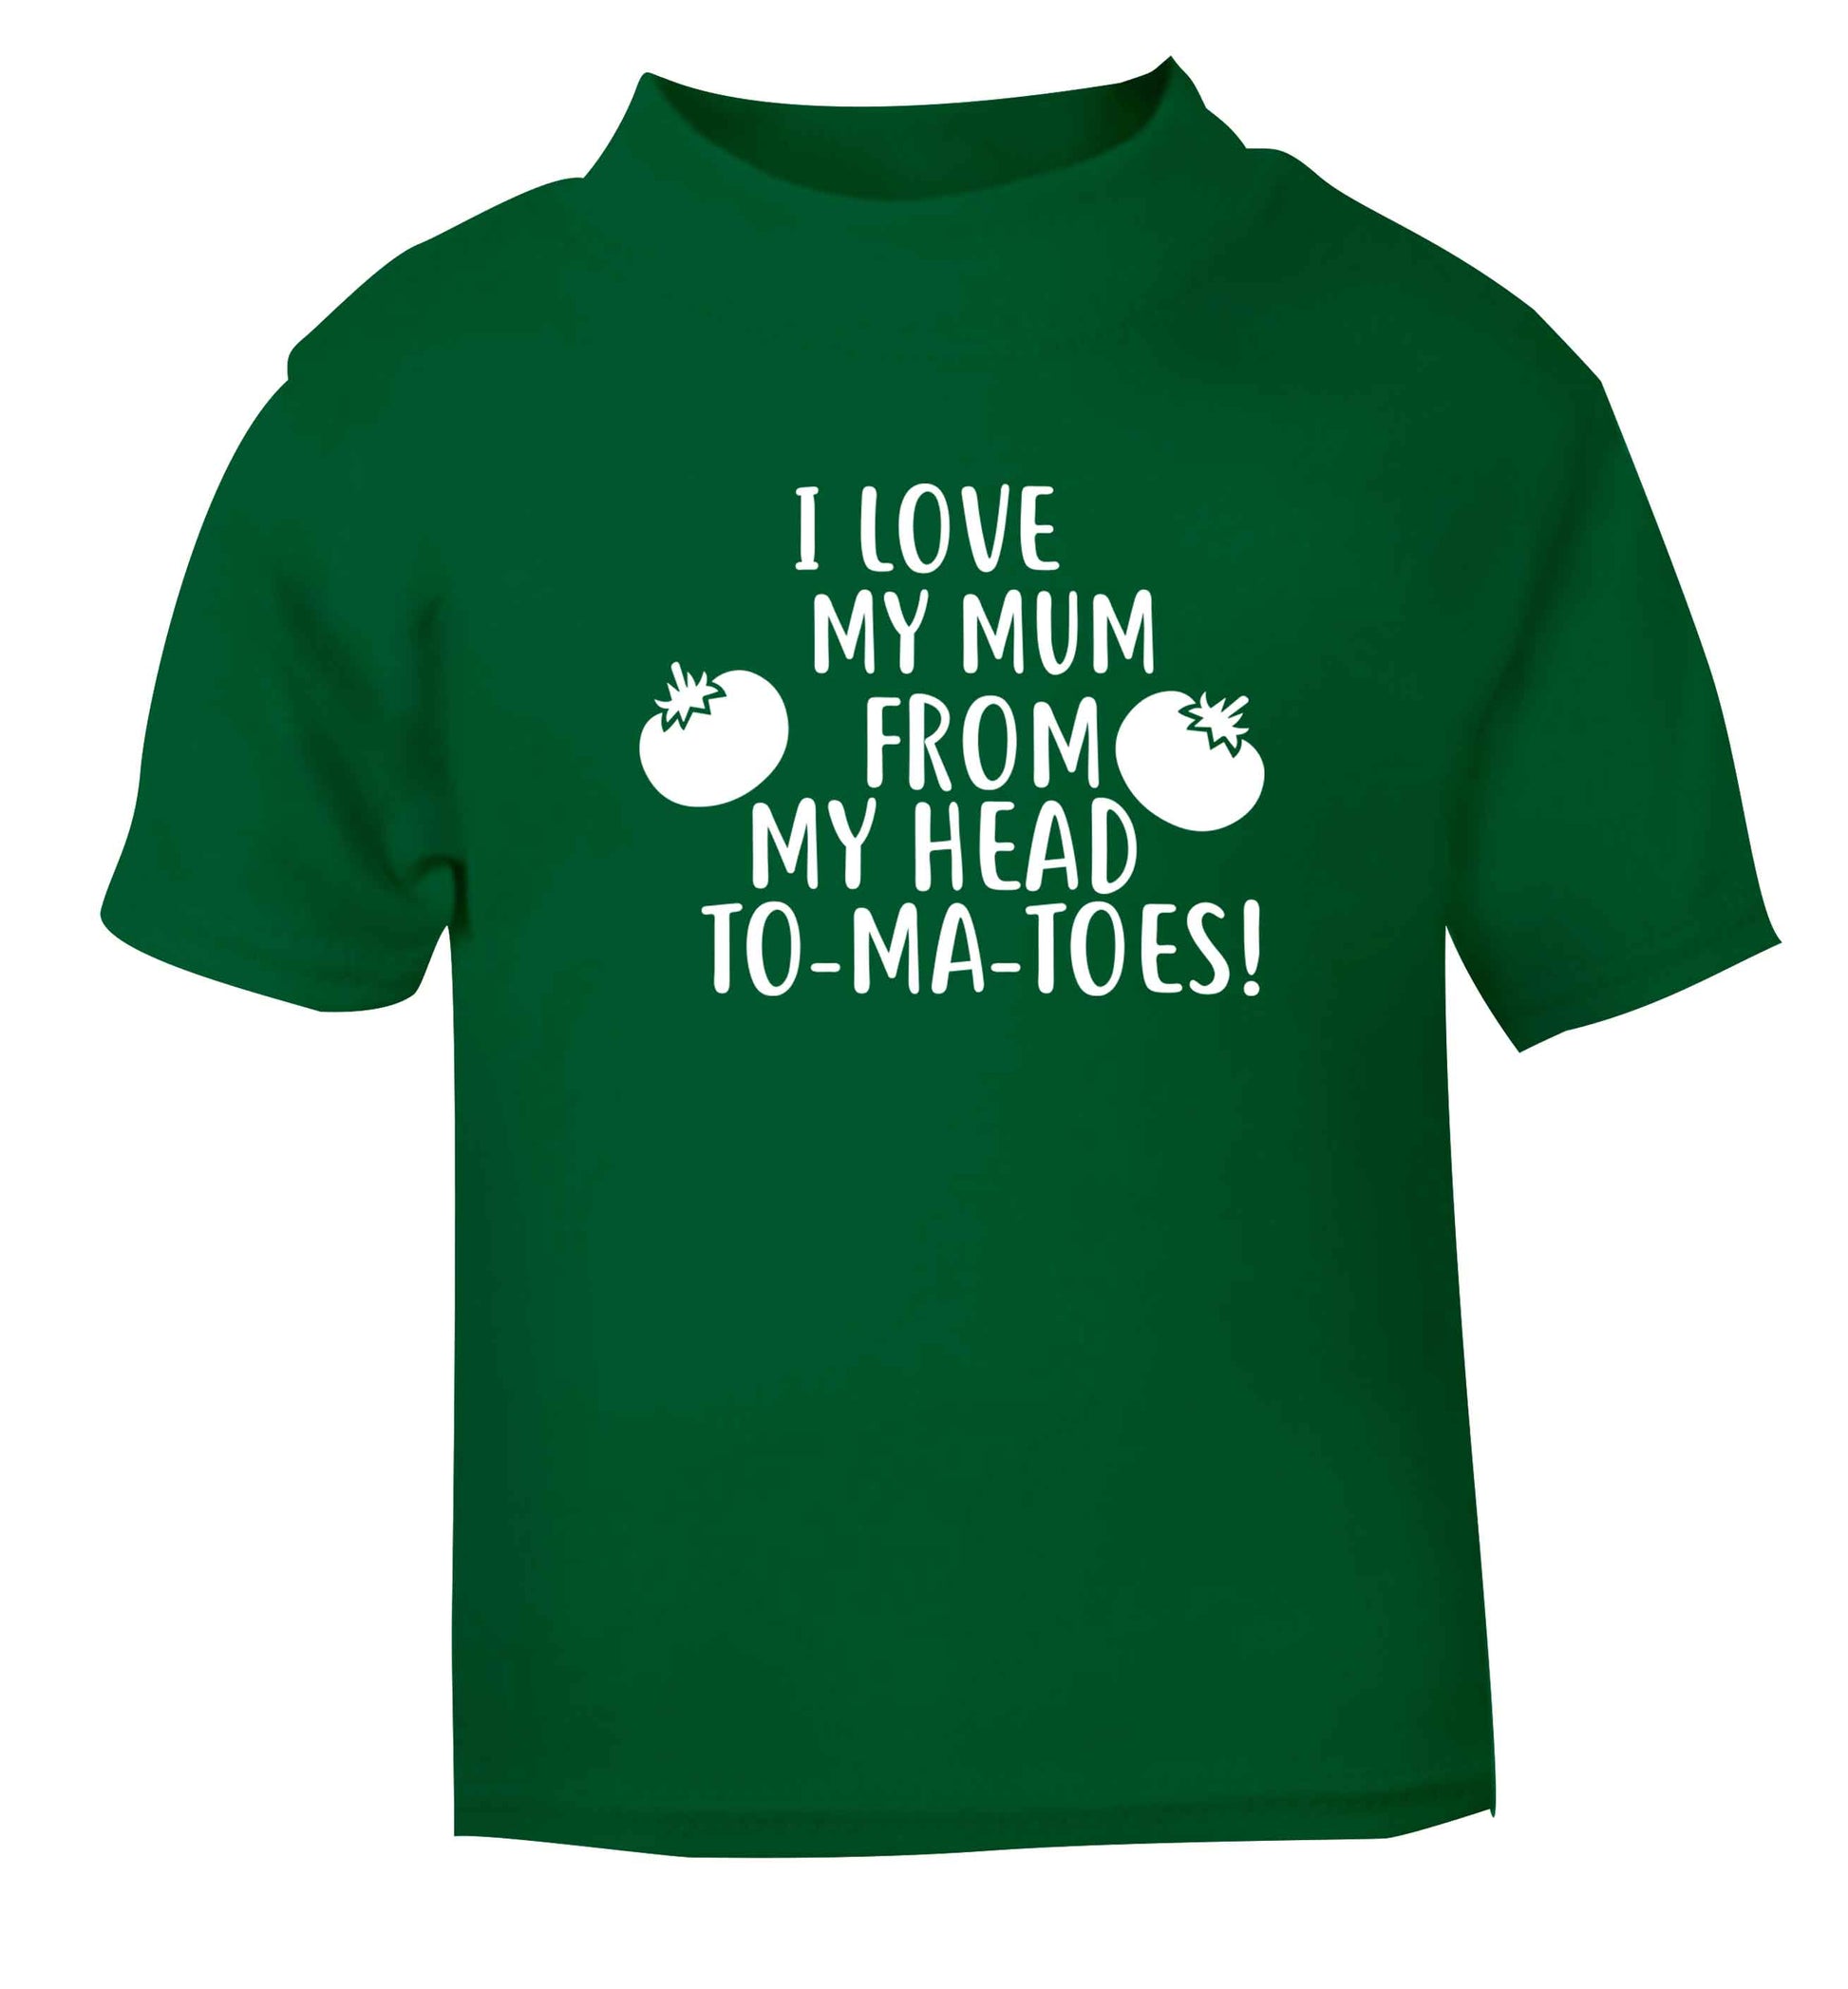 I love my mum from my head to-my-toes! green baby toddler Tshirt 2 Years